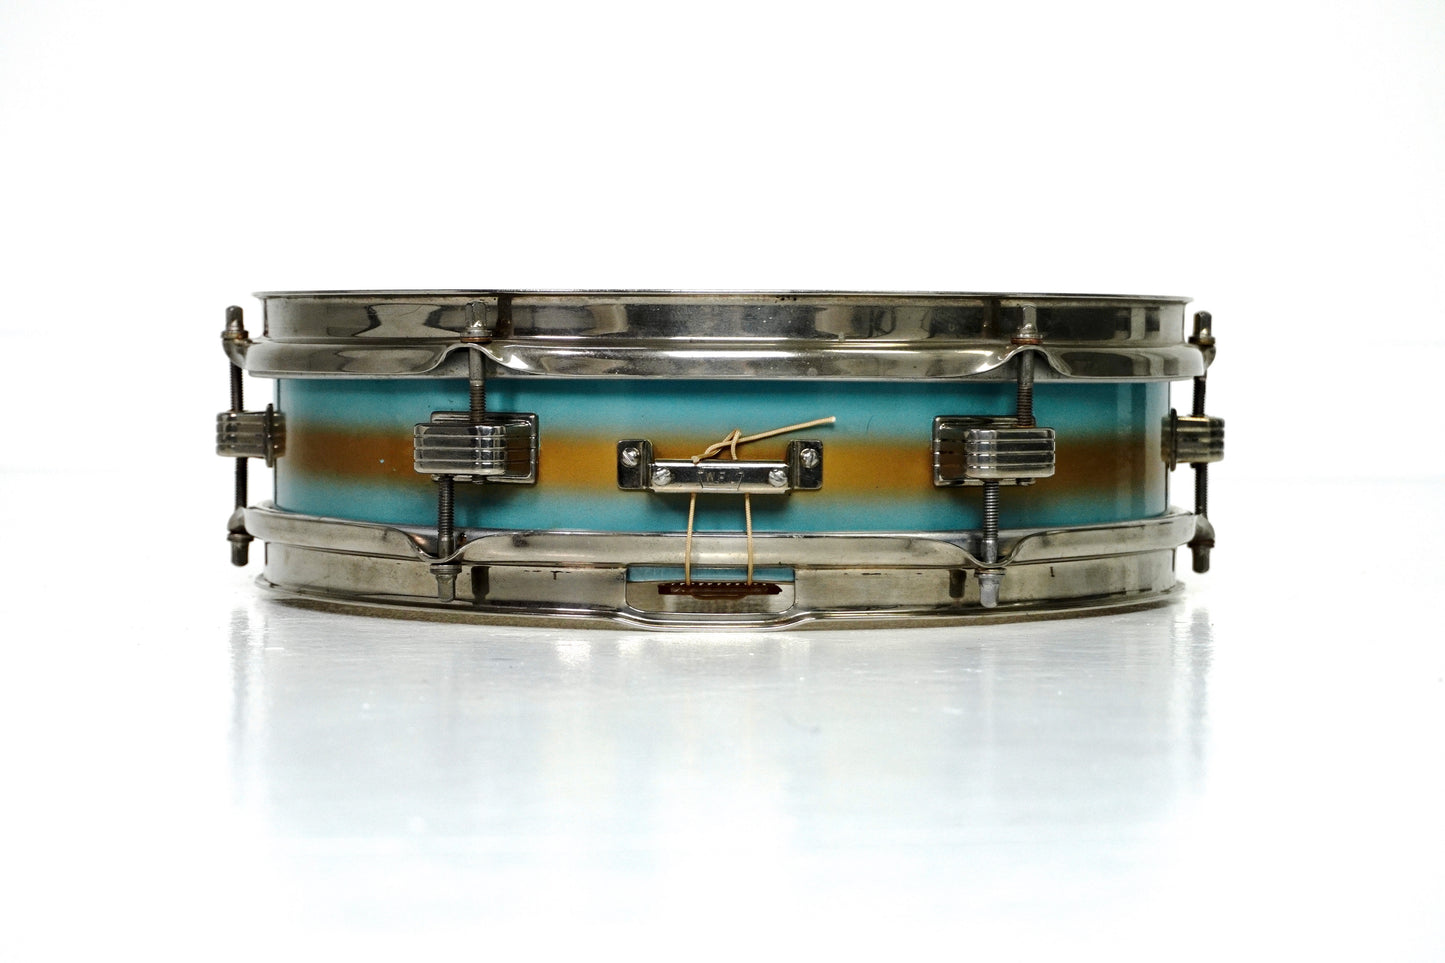 Ludwig 13” x 3” Jazz-Combo Piccolo Snare in Turquoise/Gold Duco Lacquer